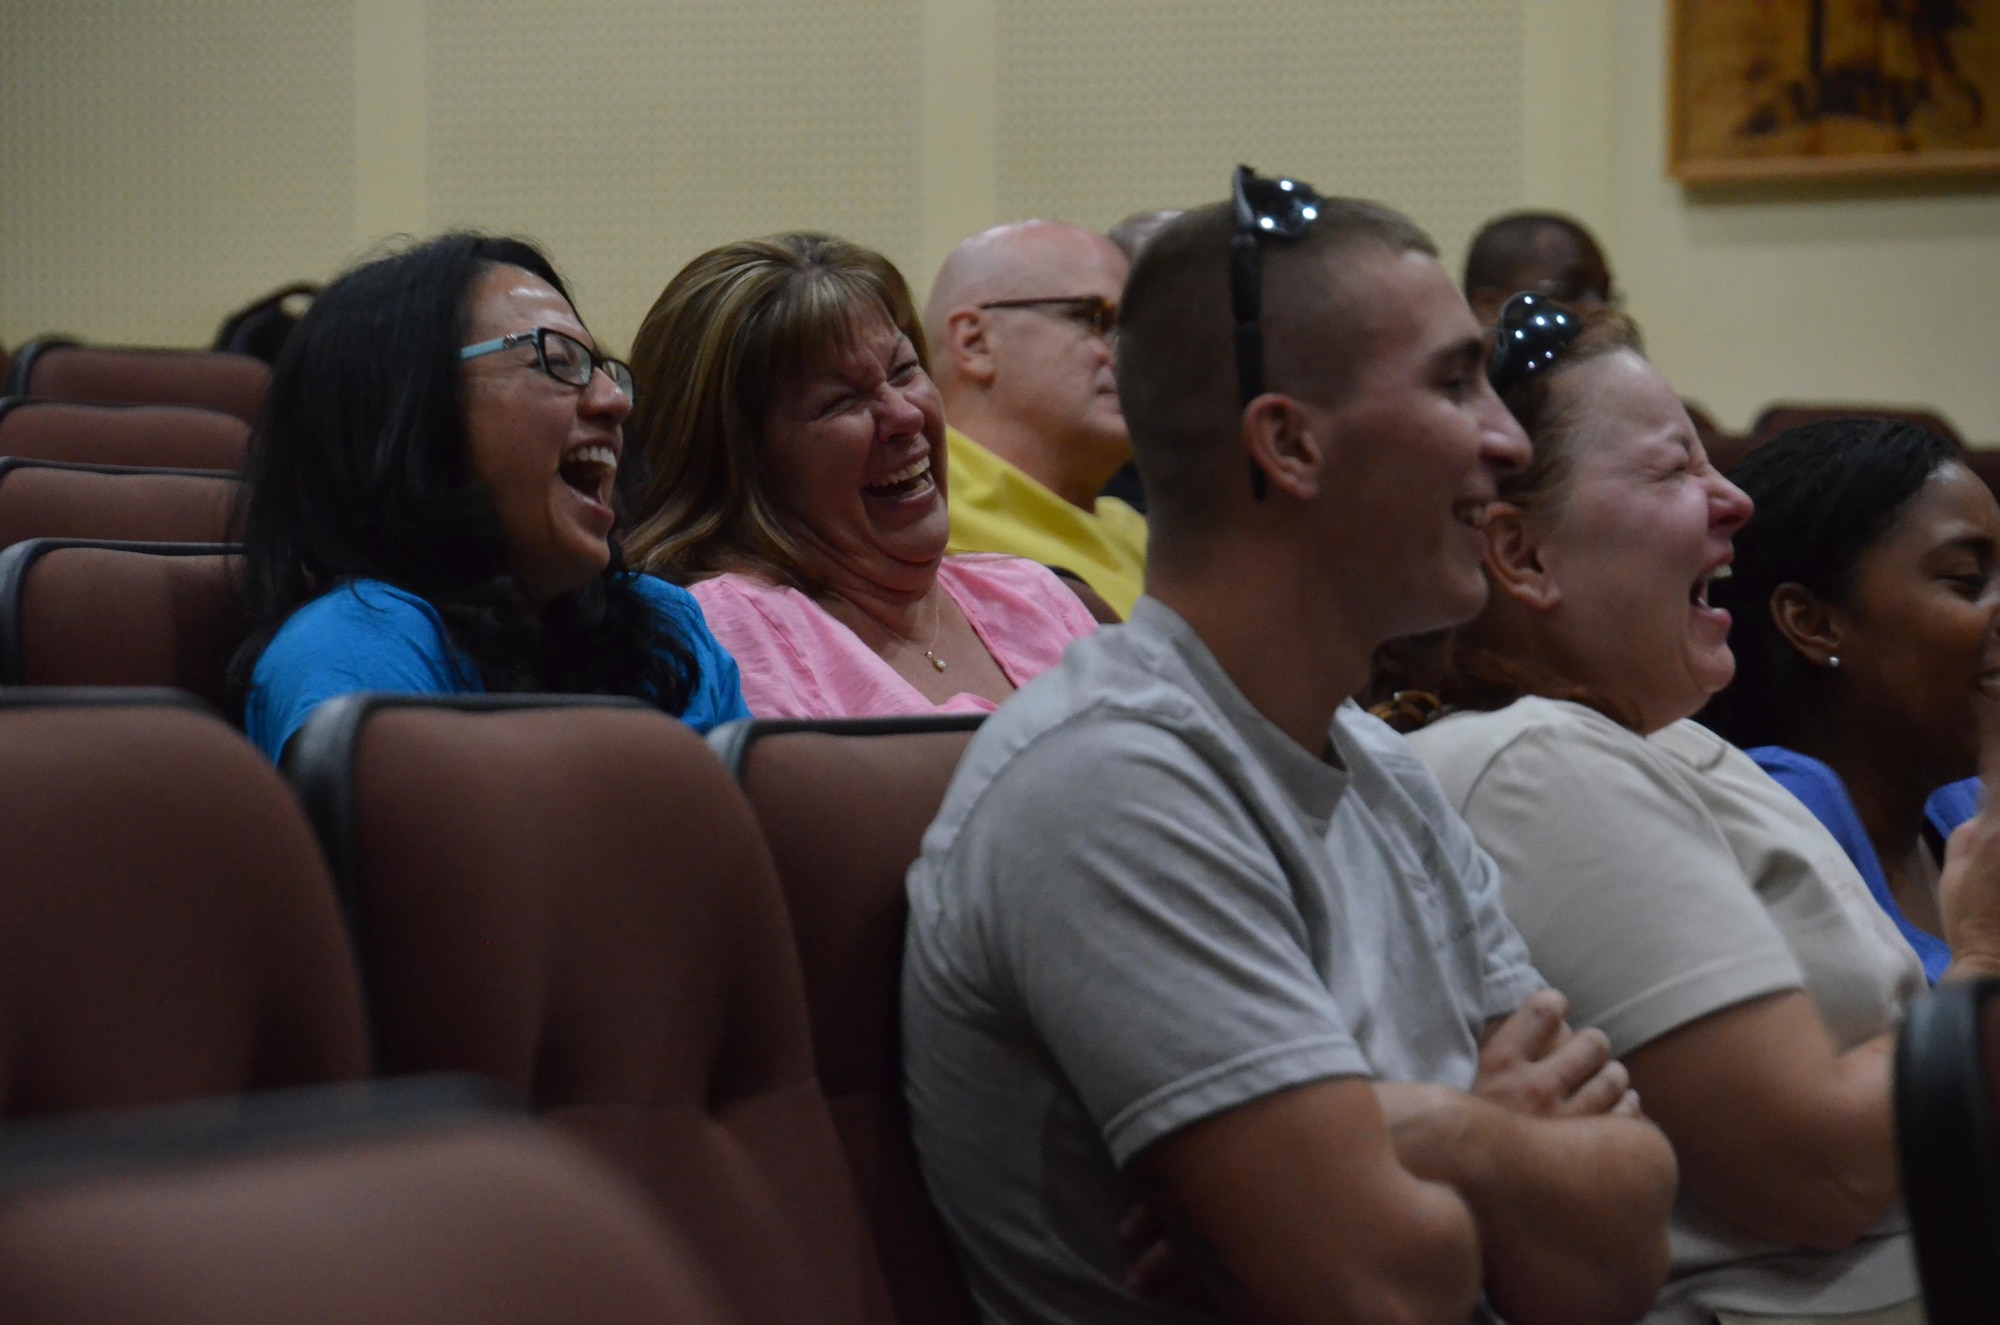 Airmen of the Rock laugh during the Tommy Davidson performance at the base theater, Aug. 13. (US Air Force photo/Master Sgt. Andrew Biscoe)